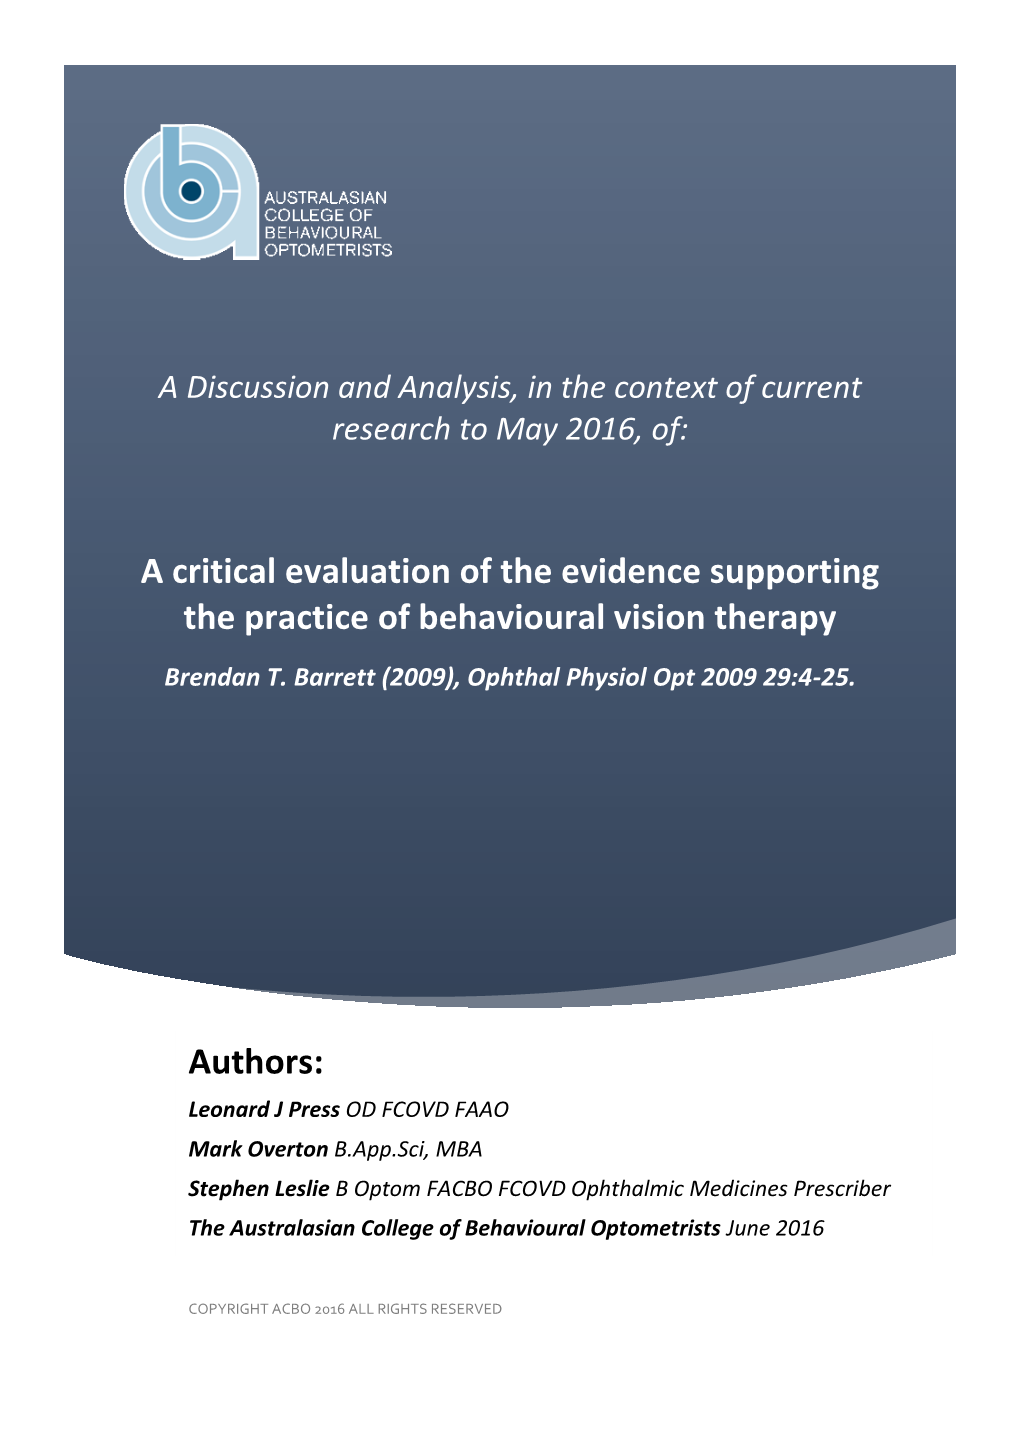 A Critical Evaluation of the Evidence Supporting the Practice of Behavioural Vision Therapy Brendan T